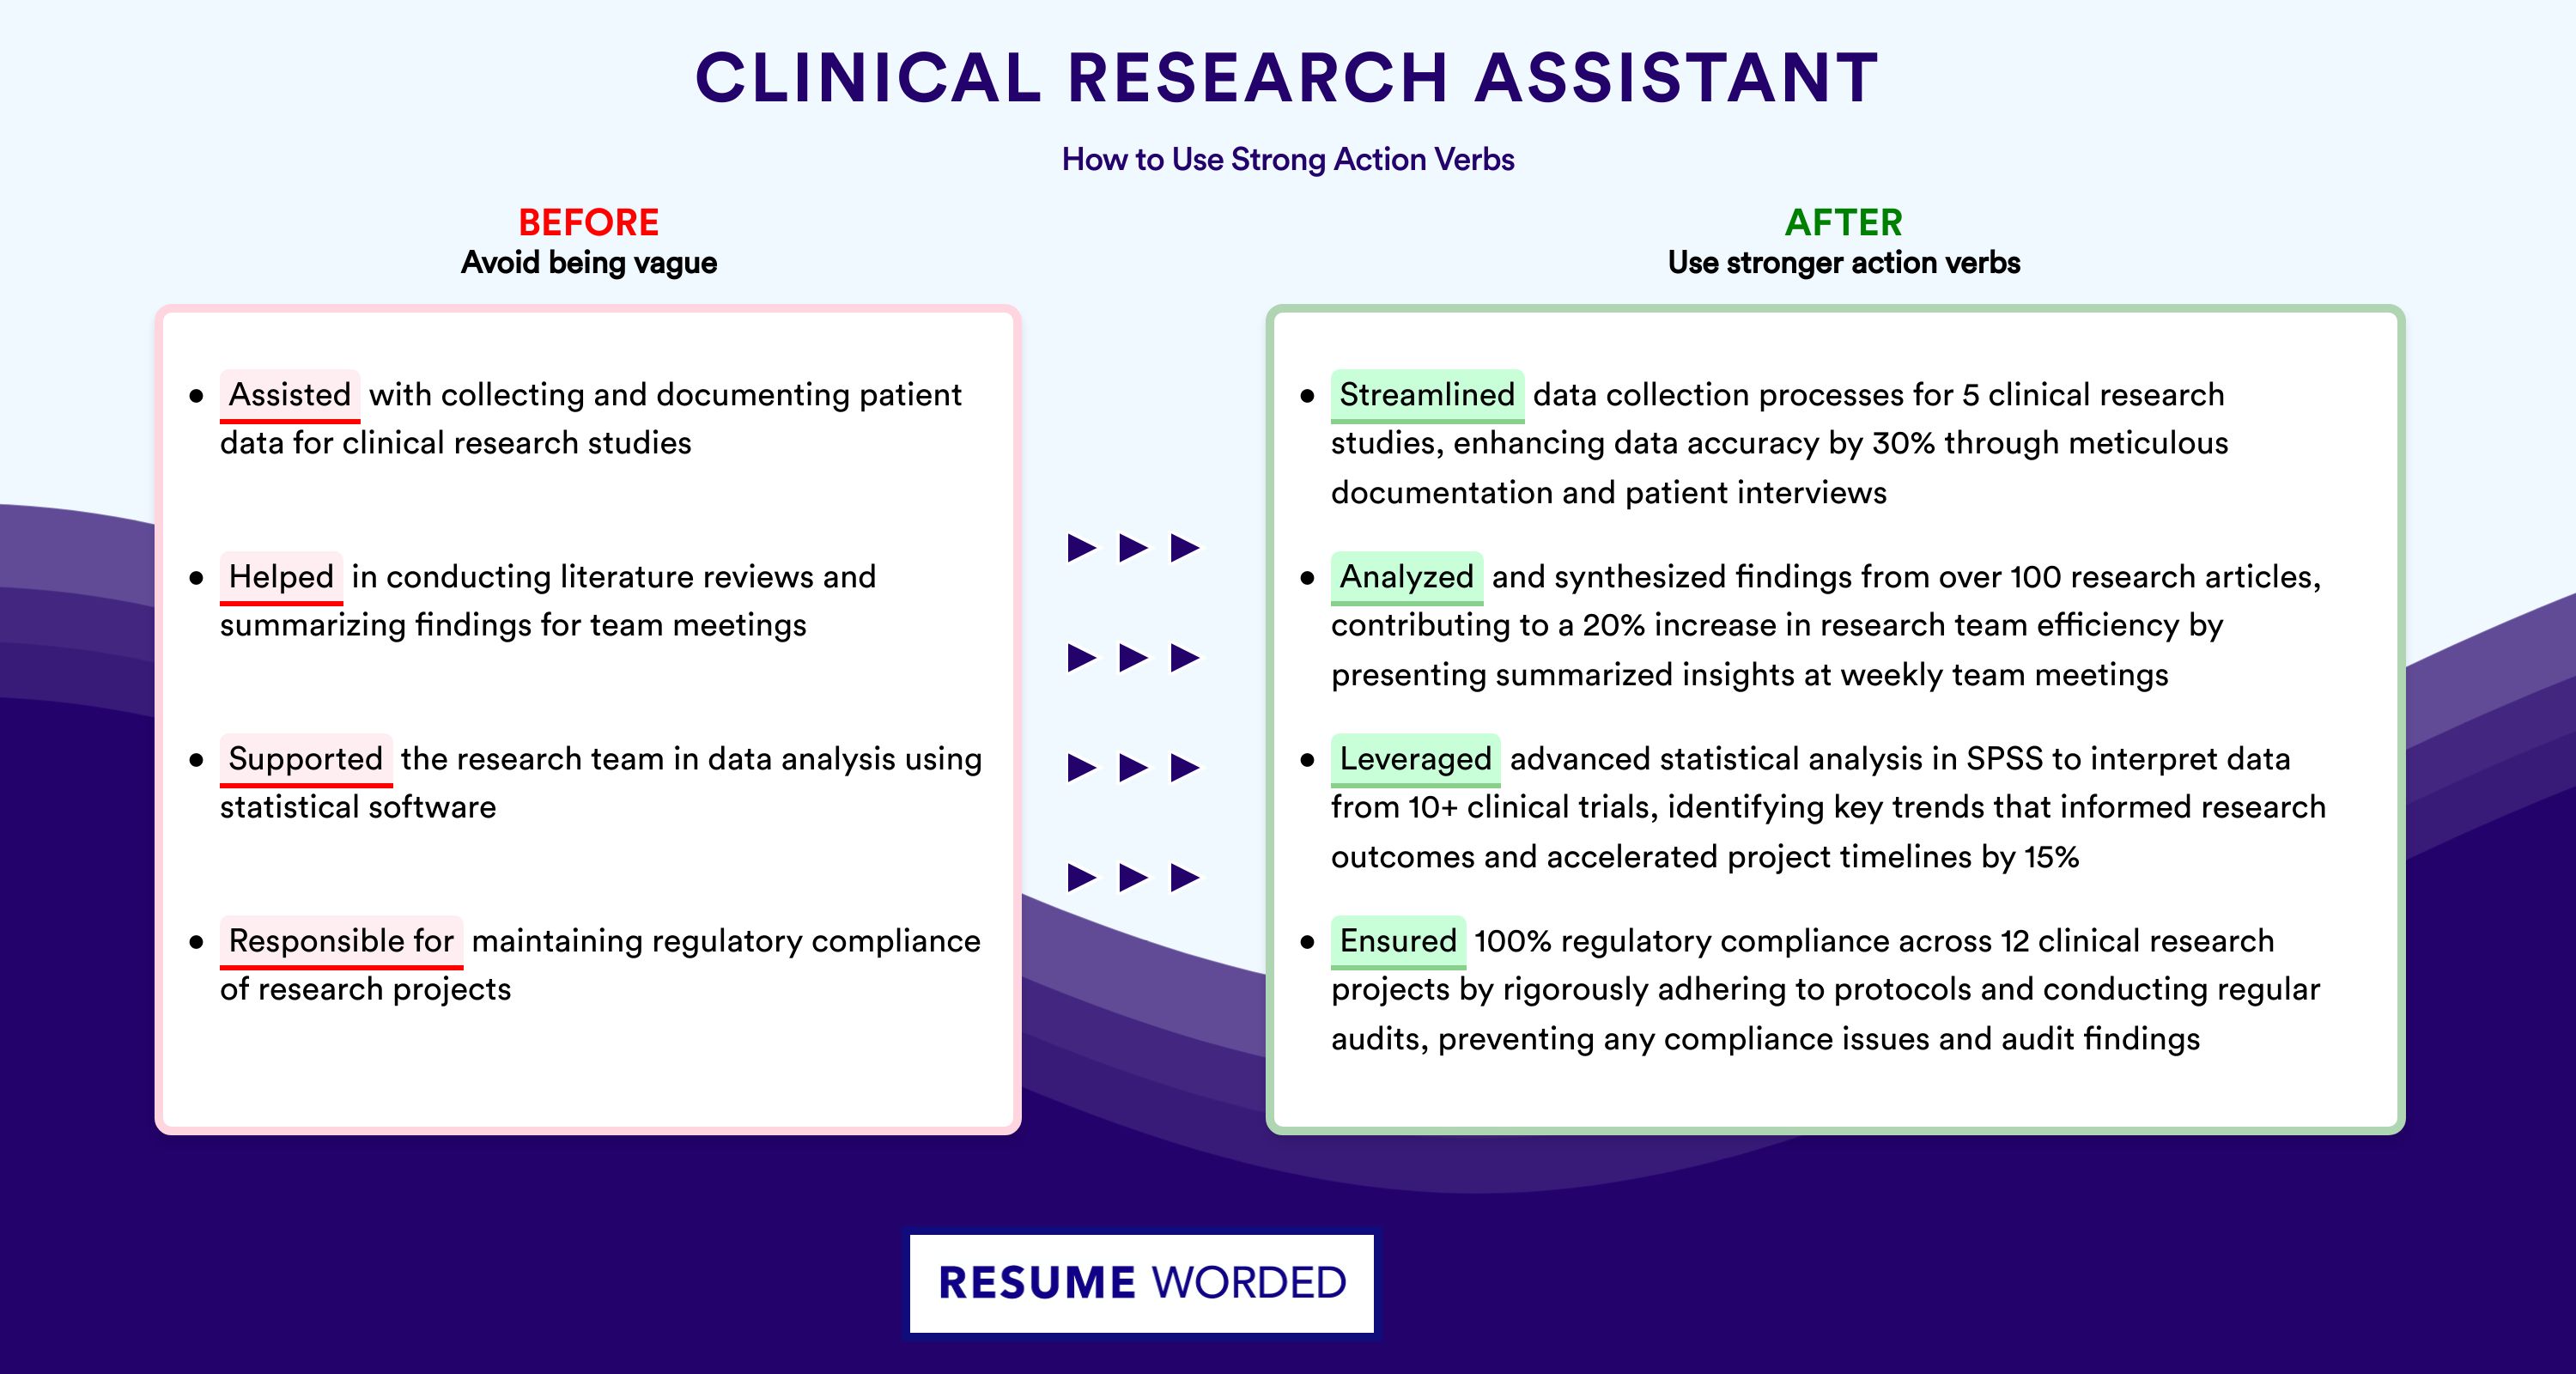 Action Verbs for Clinical Research Assistant